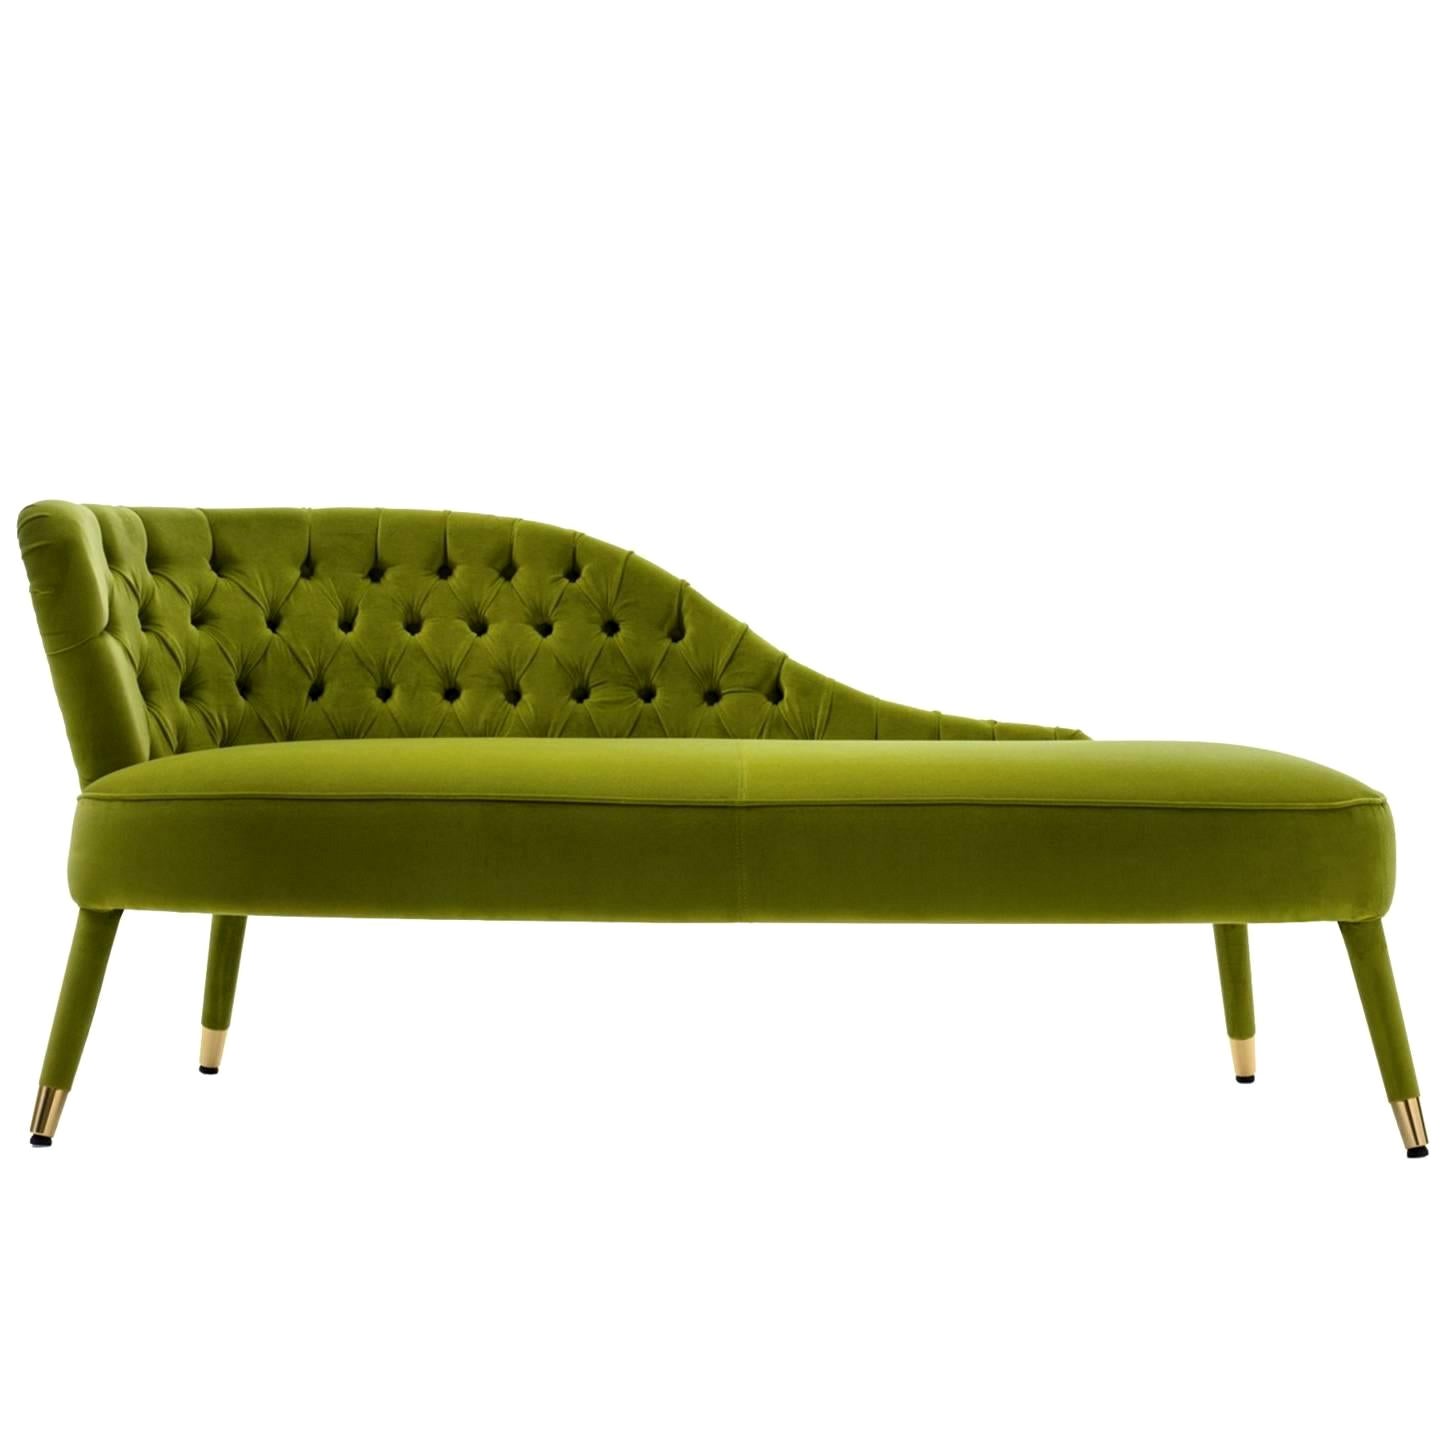 Penelope Green Chaise Longue For Sale